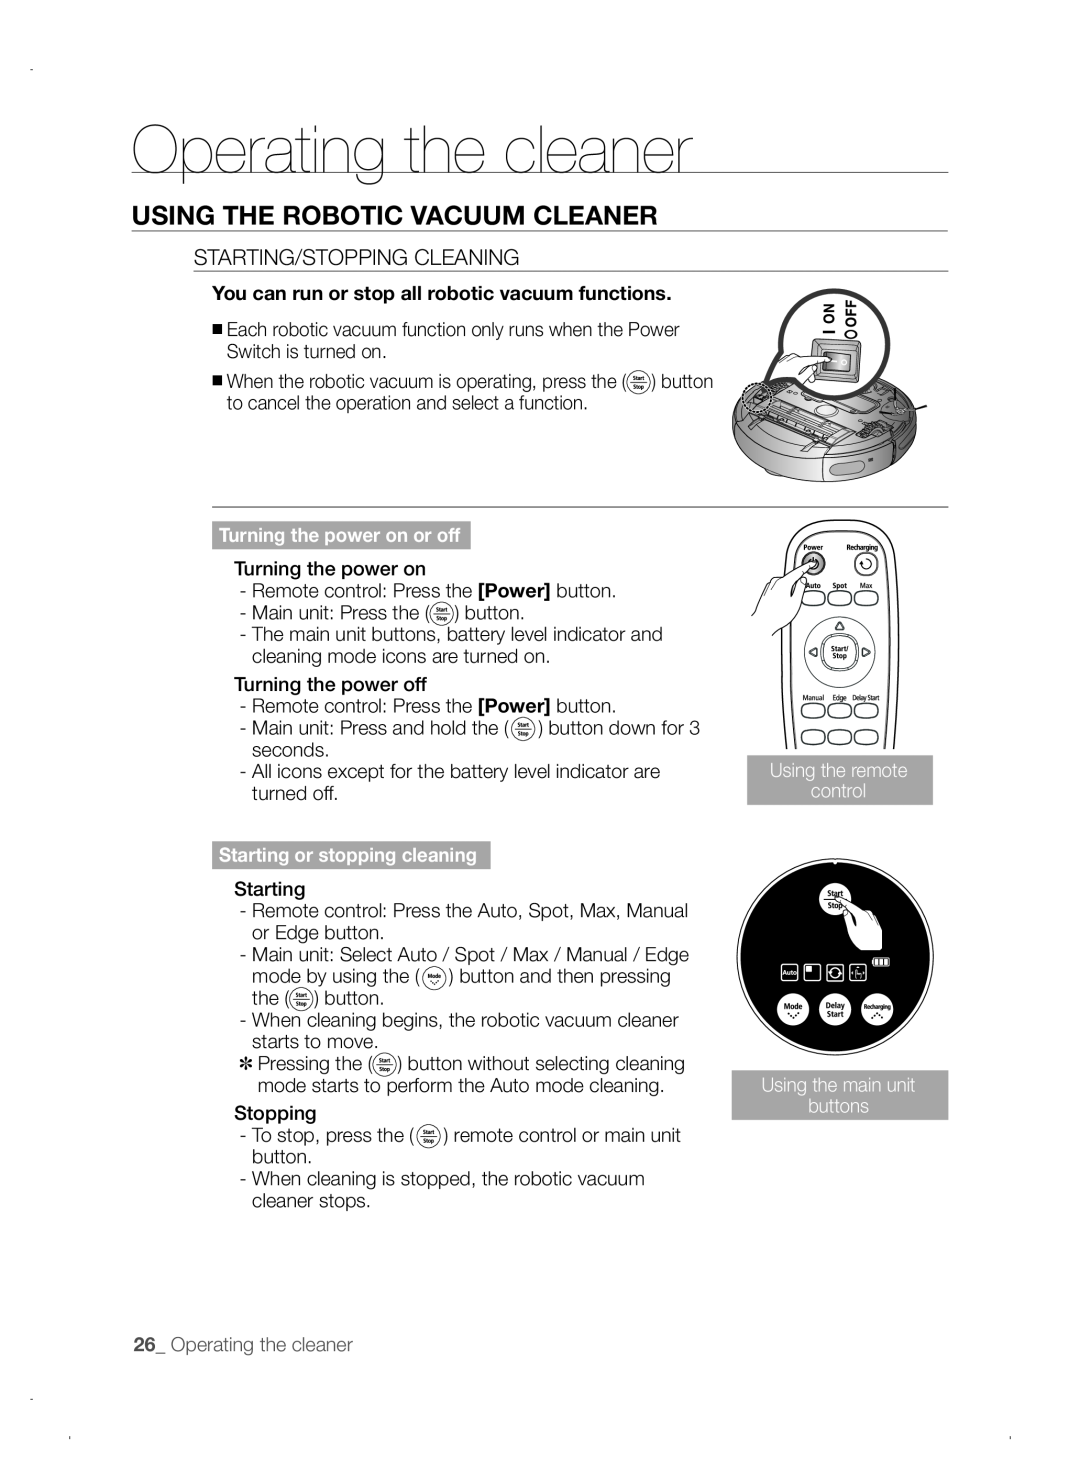 Samsung VCR8845T3A/XEO manual Using the robotic vacuum cleaner, Operating the cleaner, Turning the power on or off 